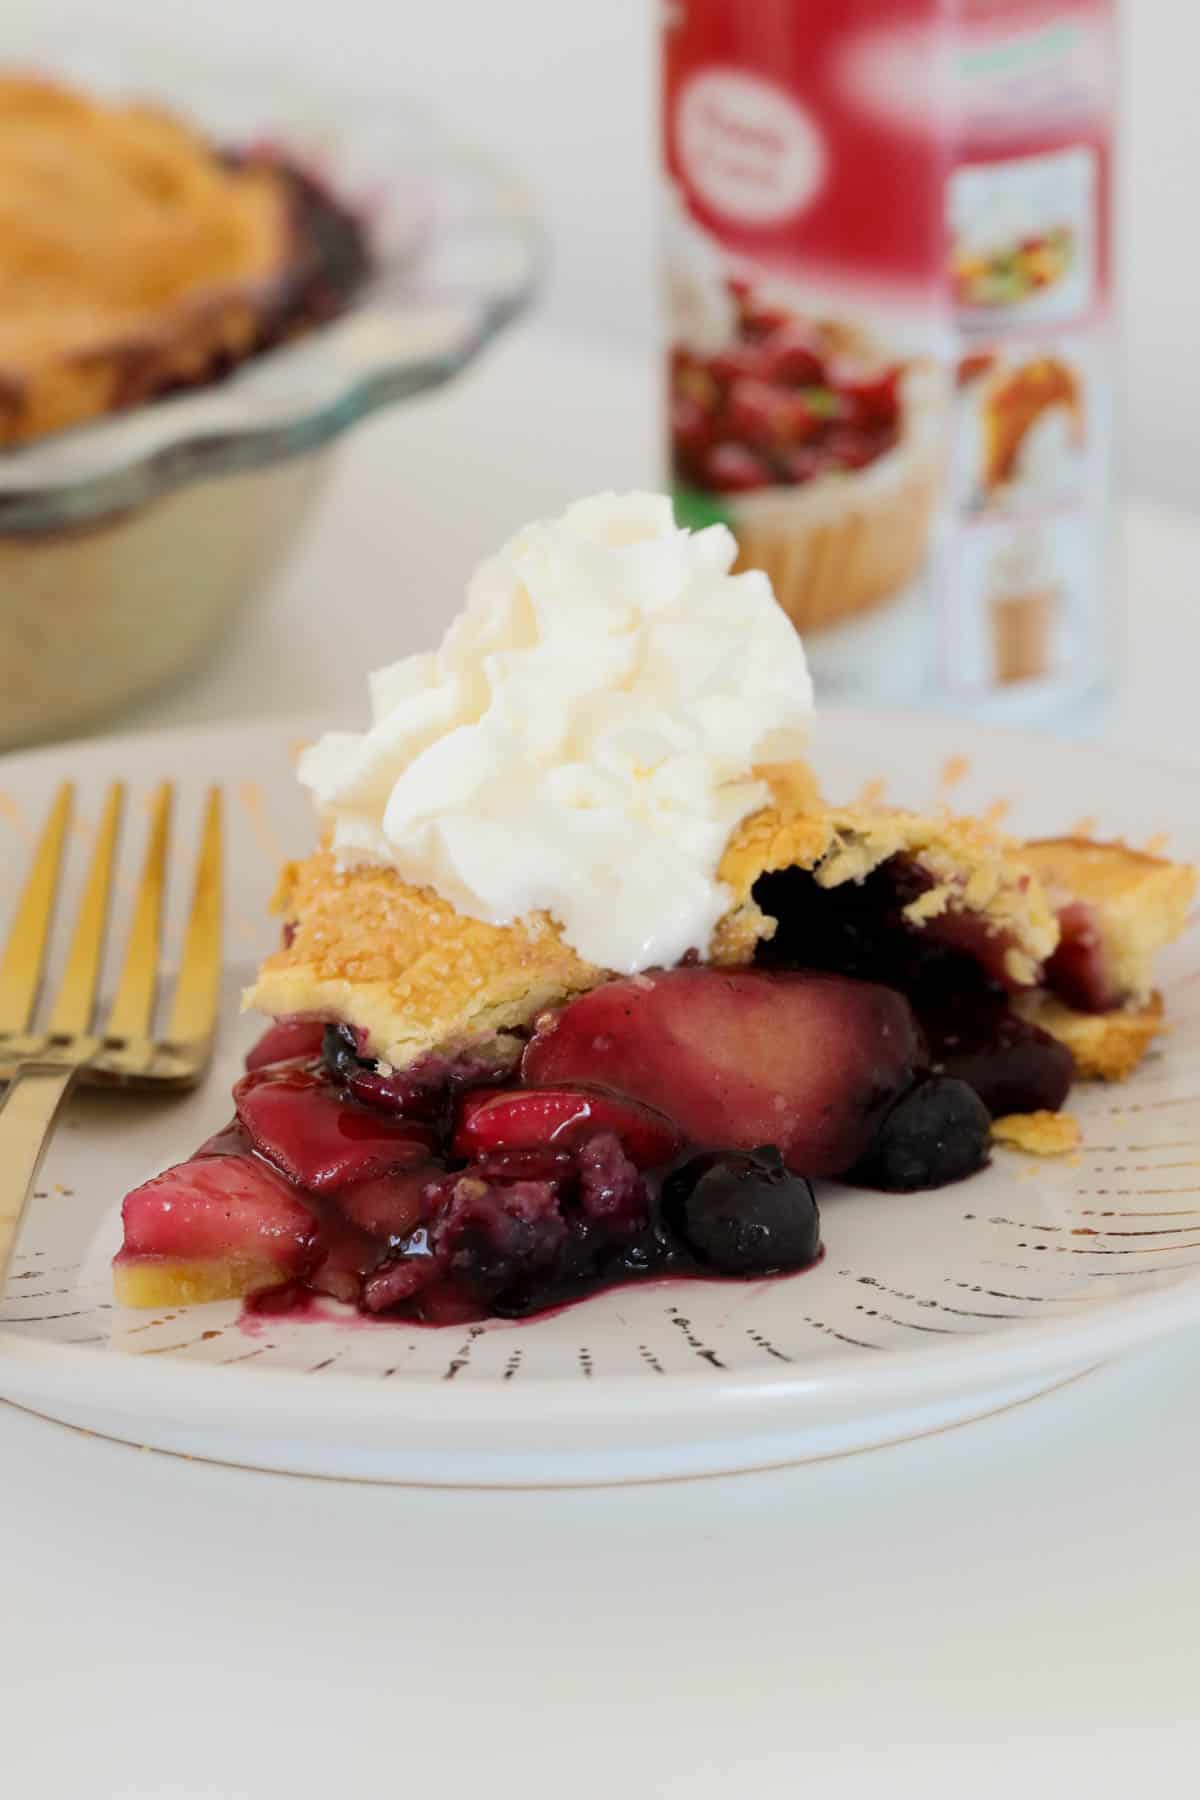 A slice of apple blueberry pie on a plate served with cream.